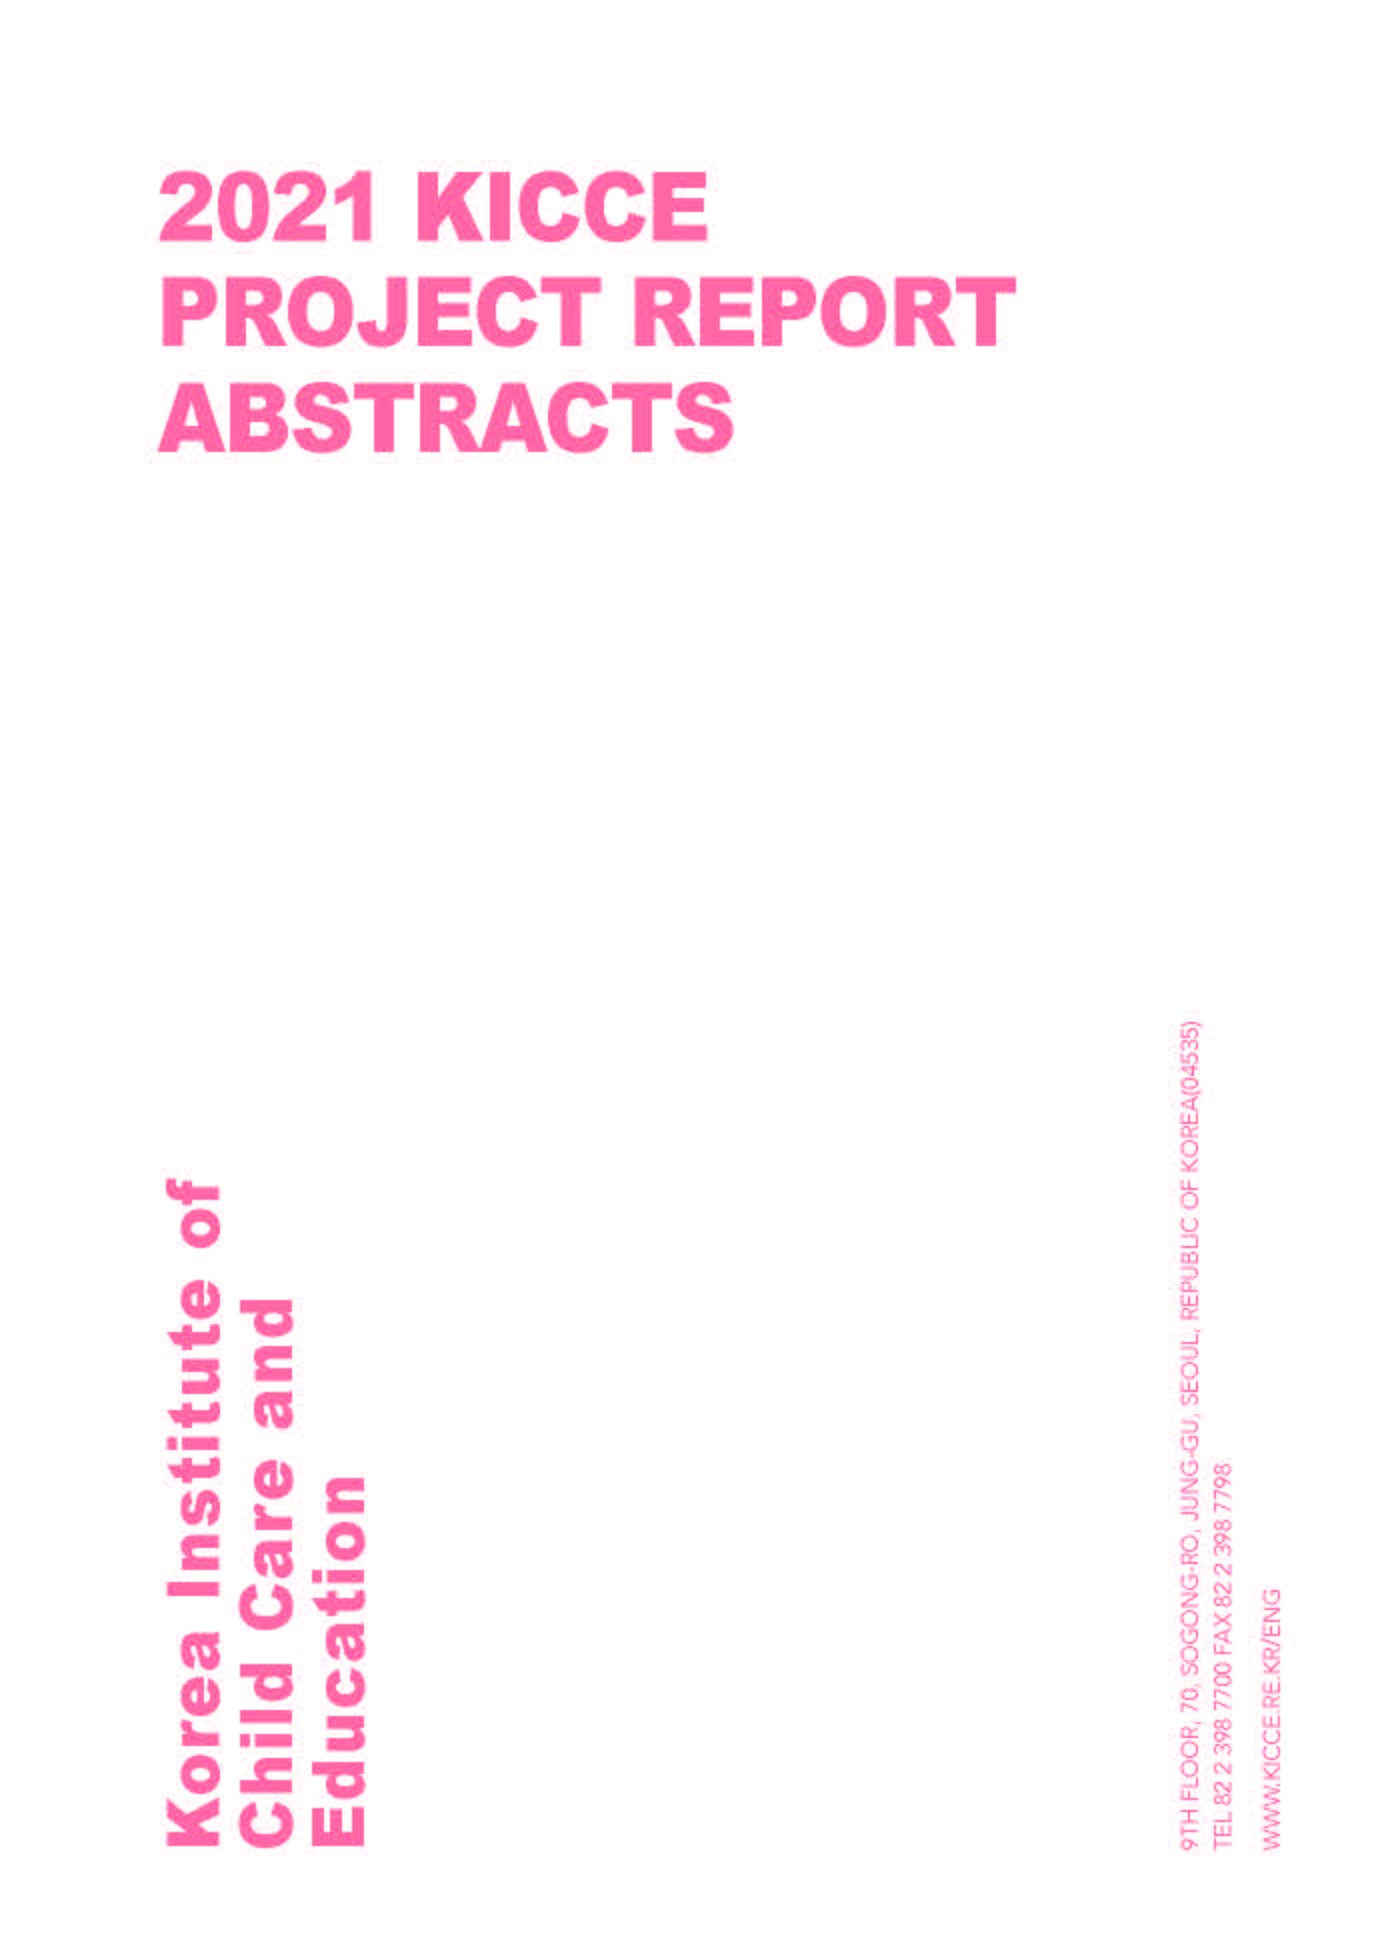 2021 KICCE Project Report Abstracts 표지 이미지